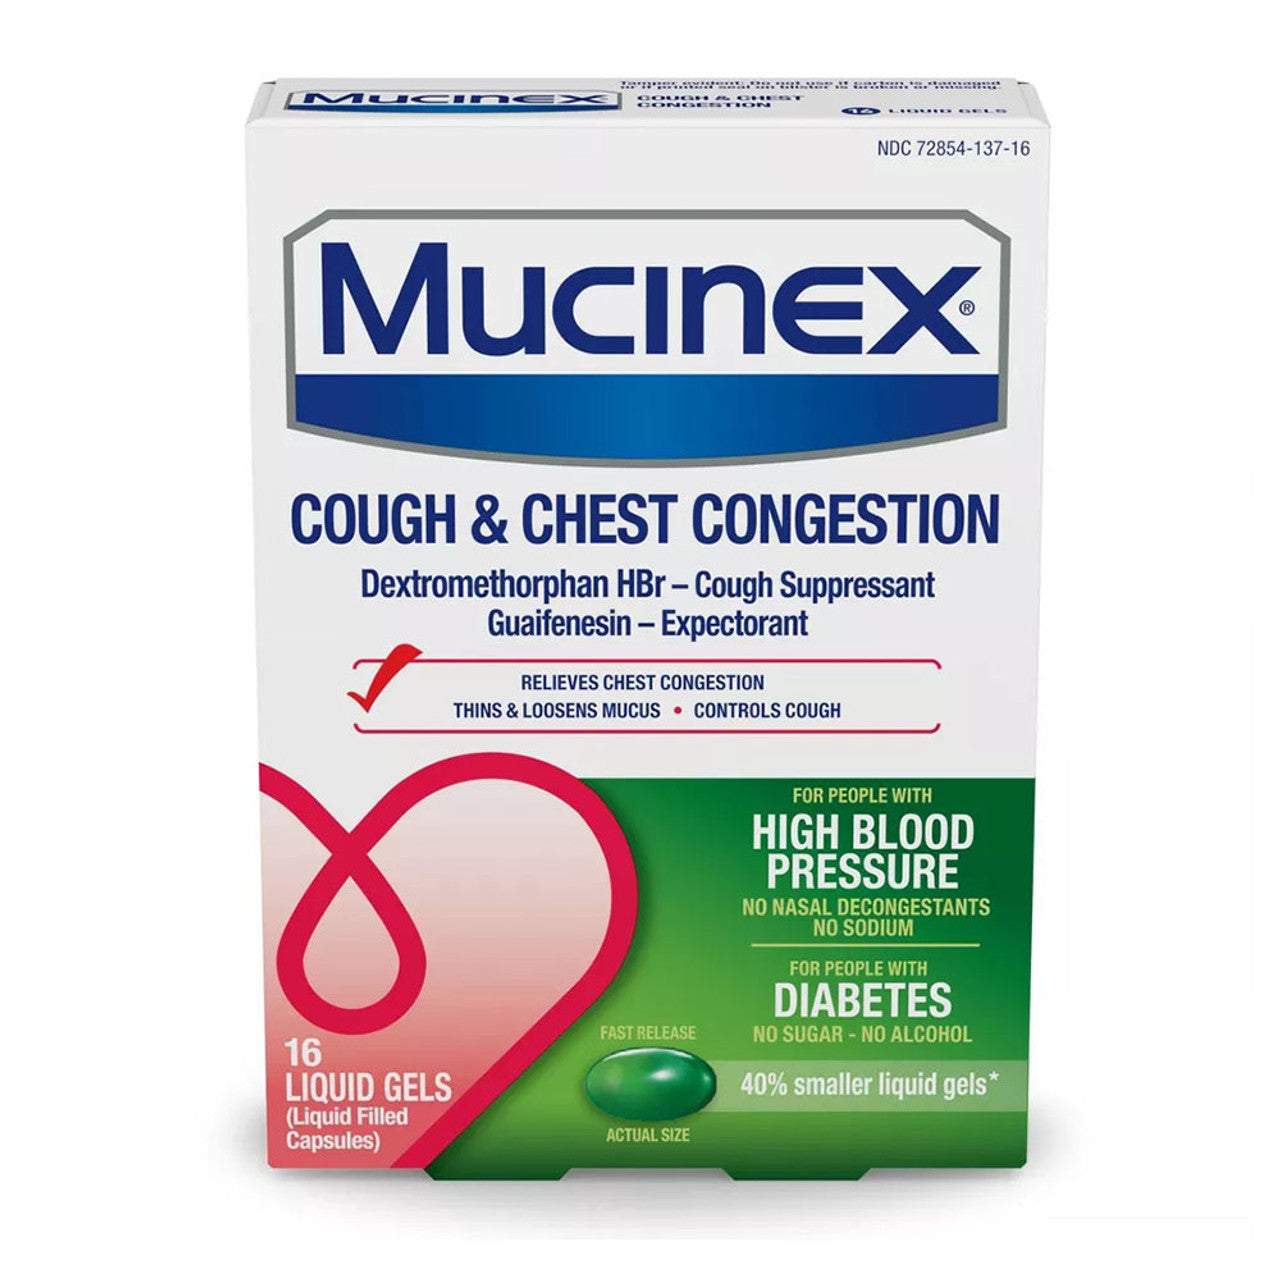 Mucinex High Blood Pressure Cough And Chest Congestion Medicine, 16 Ea